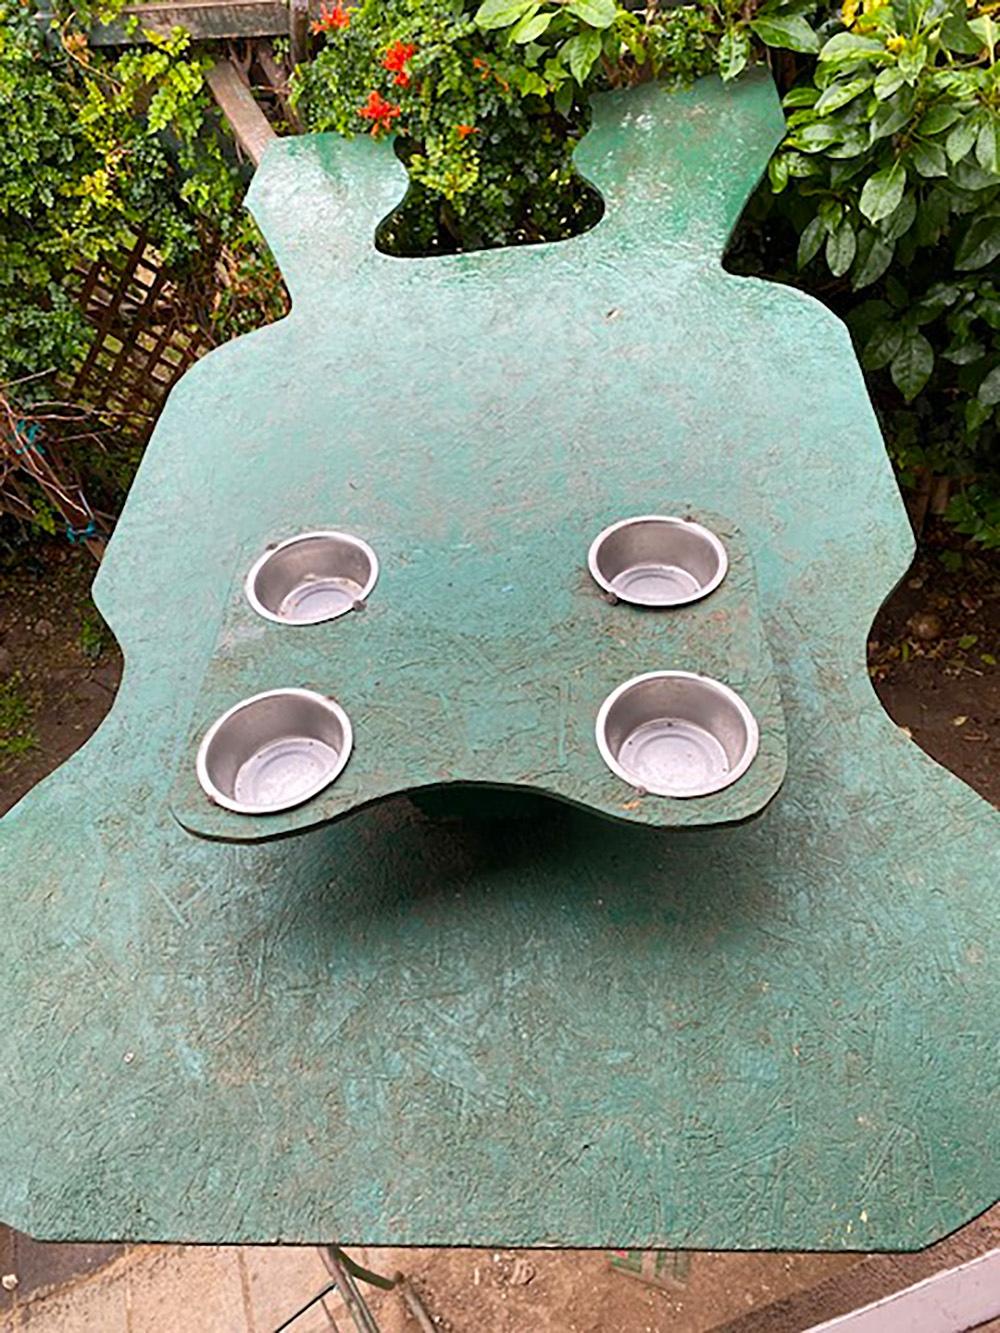 A green, four-bowl feeding platform for raccoons, set in a garden surrounded by thick green foliage.